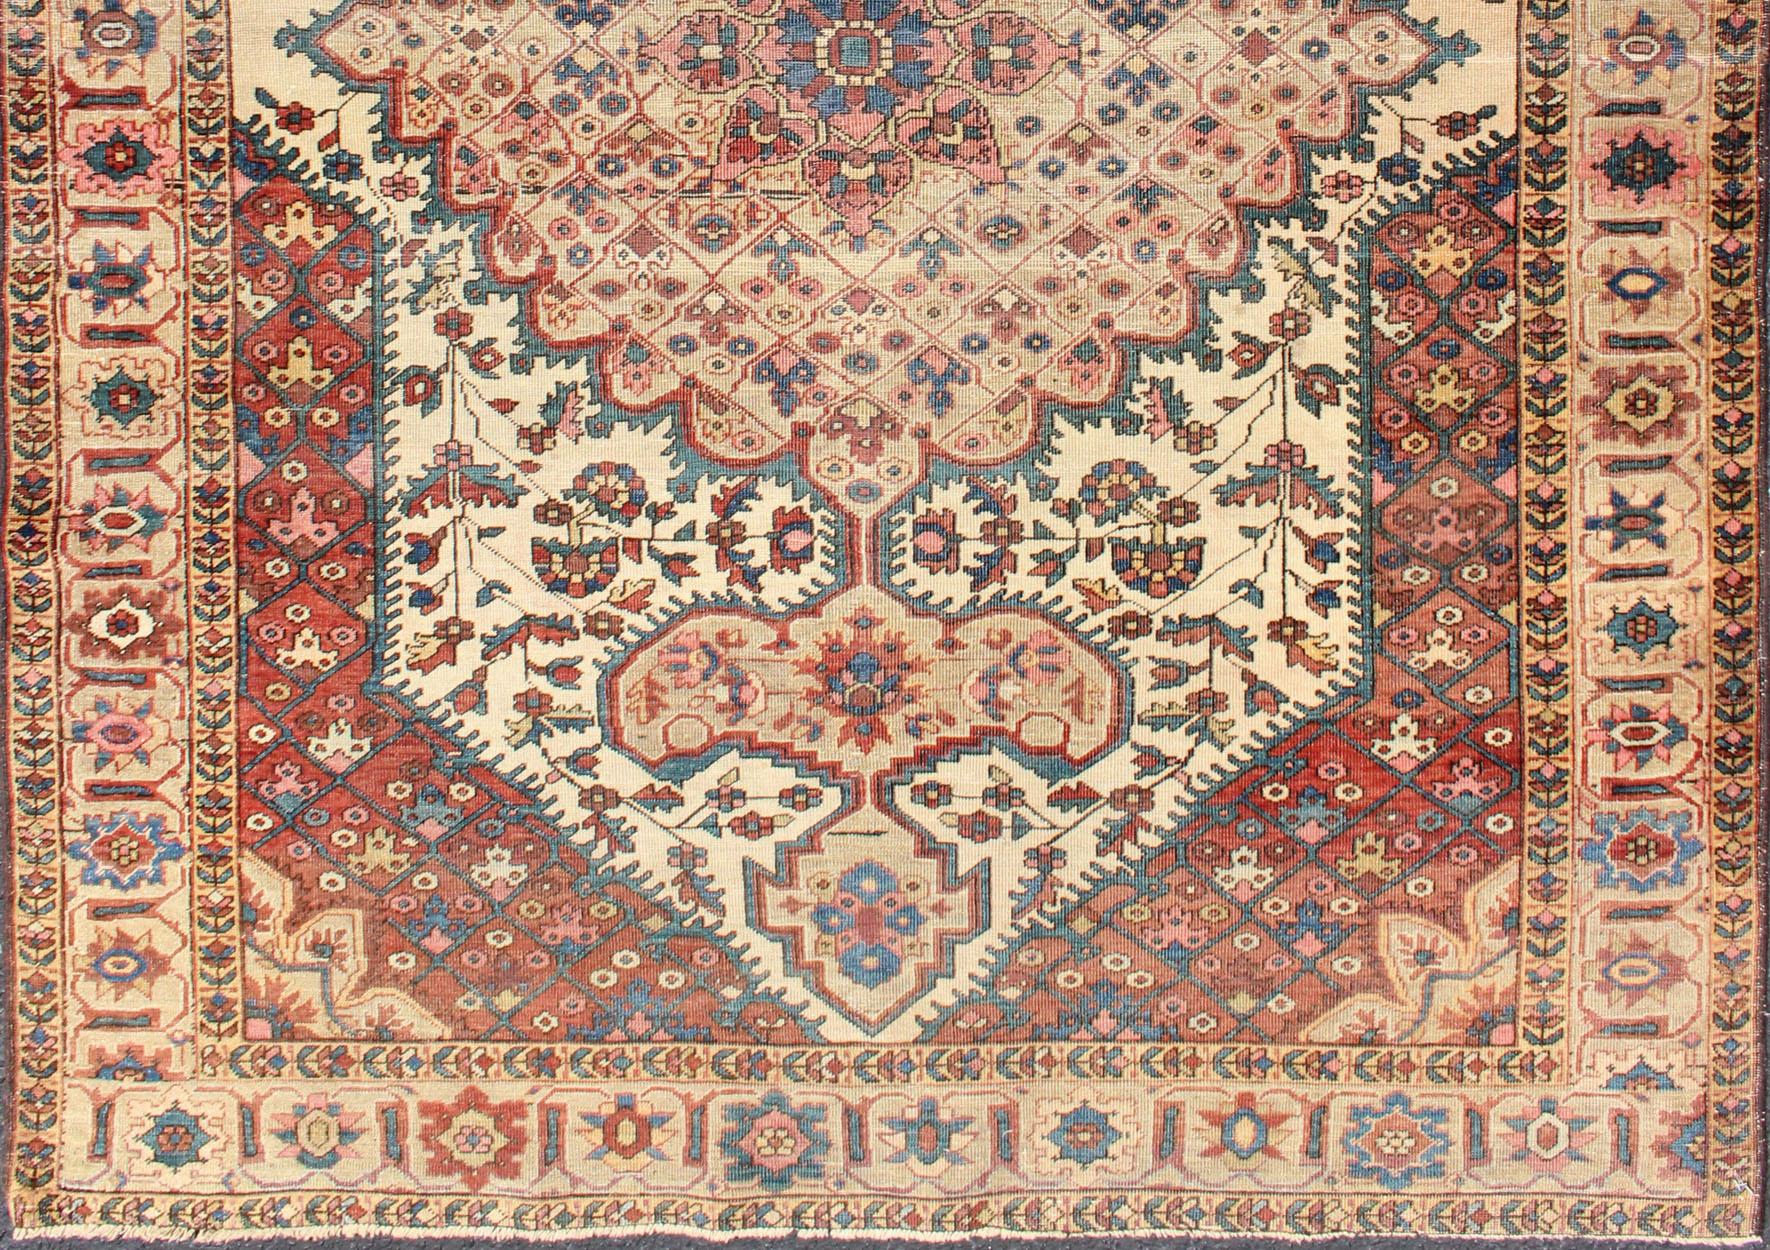 Antique Ferahan Sarouk rug in ivory background, red brown, camel and teal, green and denim blue. Rug/S12-0616. Antique Sarouk Faraghan
This outstanding antique Farahan Sarouk carpet is primarily characterized by its classical composition and as a